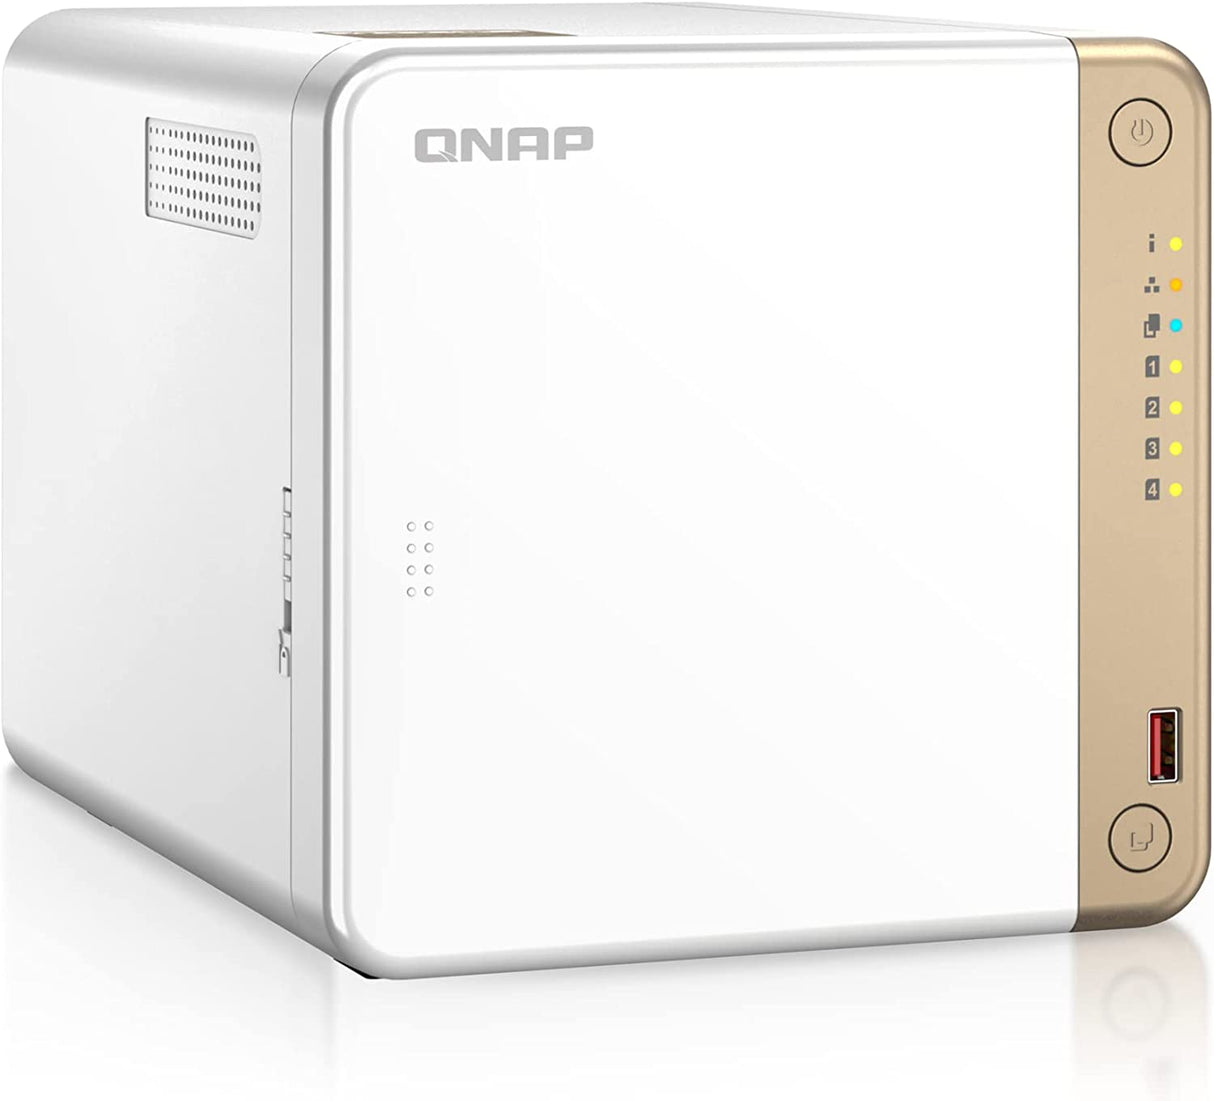 QNAP TS-462-2G-US 4 Bay Multimedia Desktop NAS with Intel Celeron Dual-core Processor with M.2 PCIe Slots and PCIe expandability and 2.5GbE (2.5G/1G/100M) Network Connectivity (Diskless)